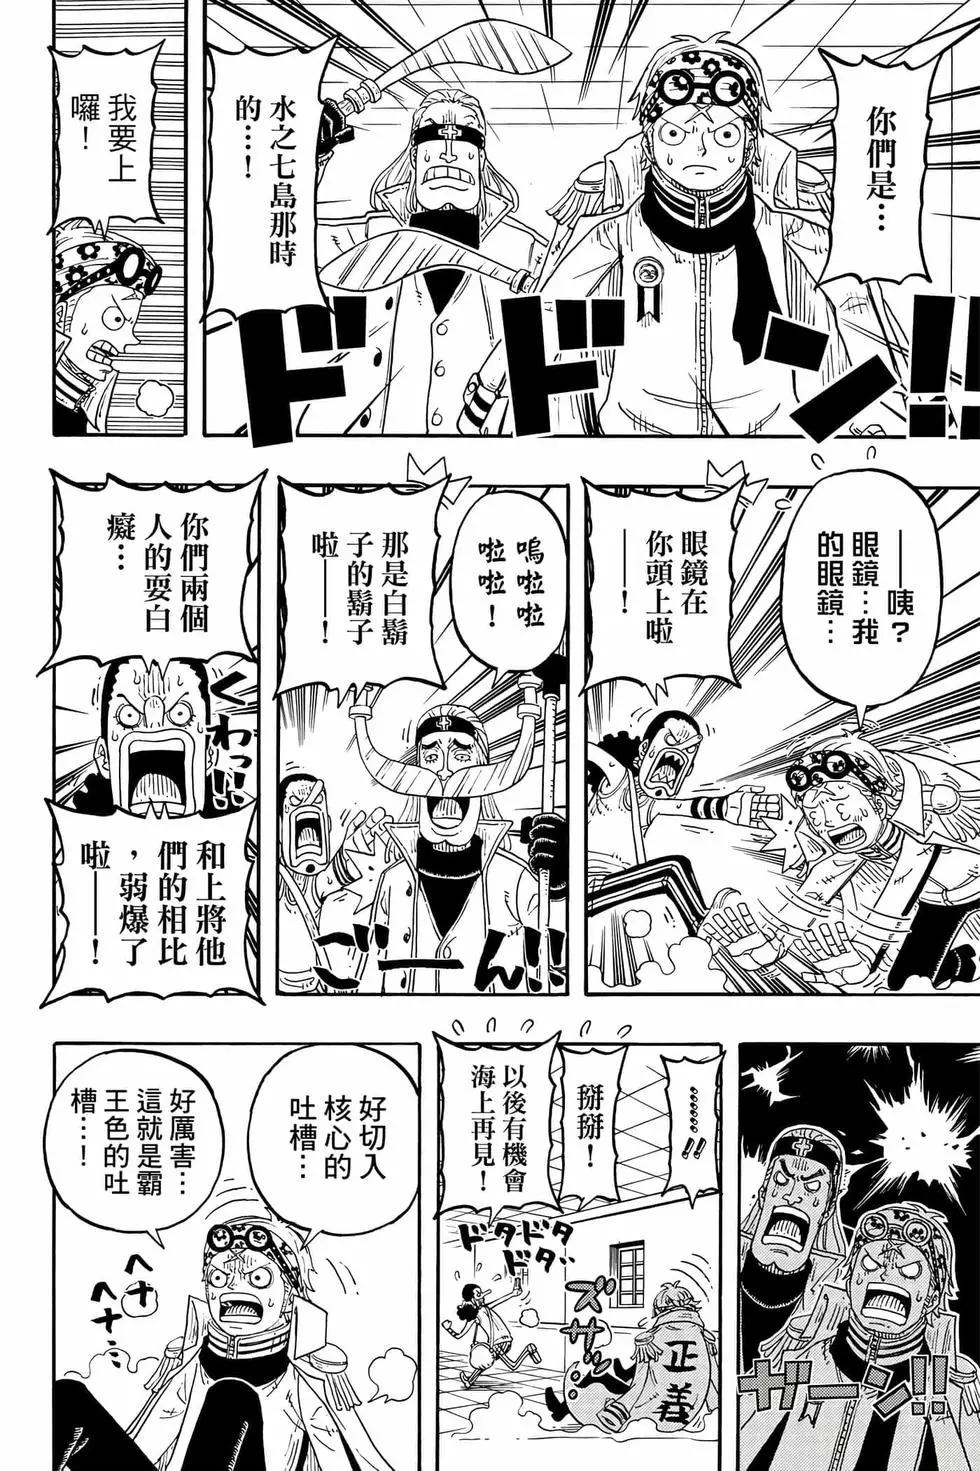 One piece party - 第04卷(1/4) - 3